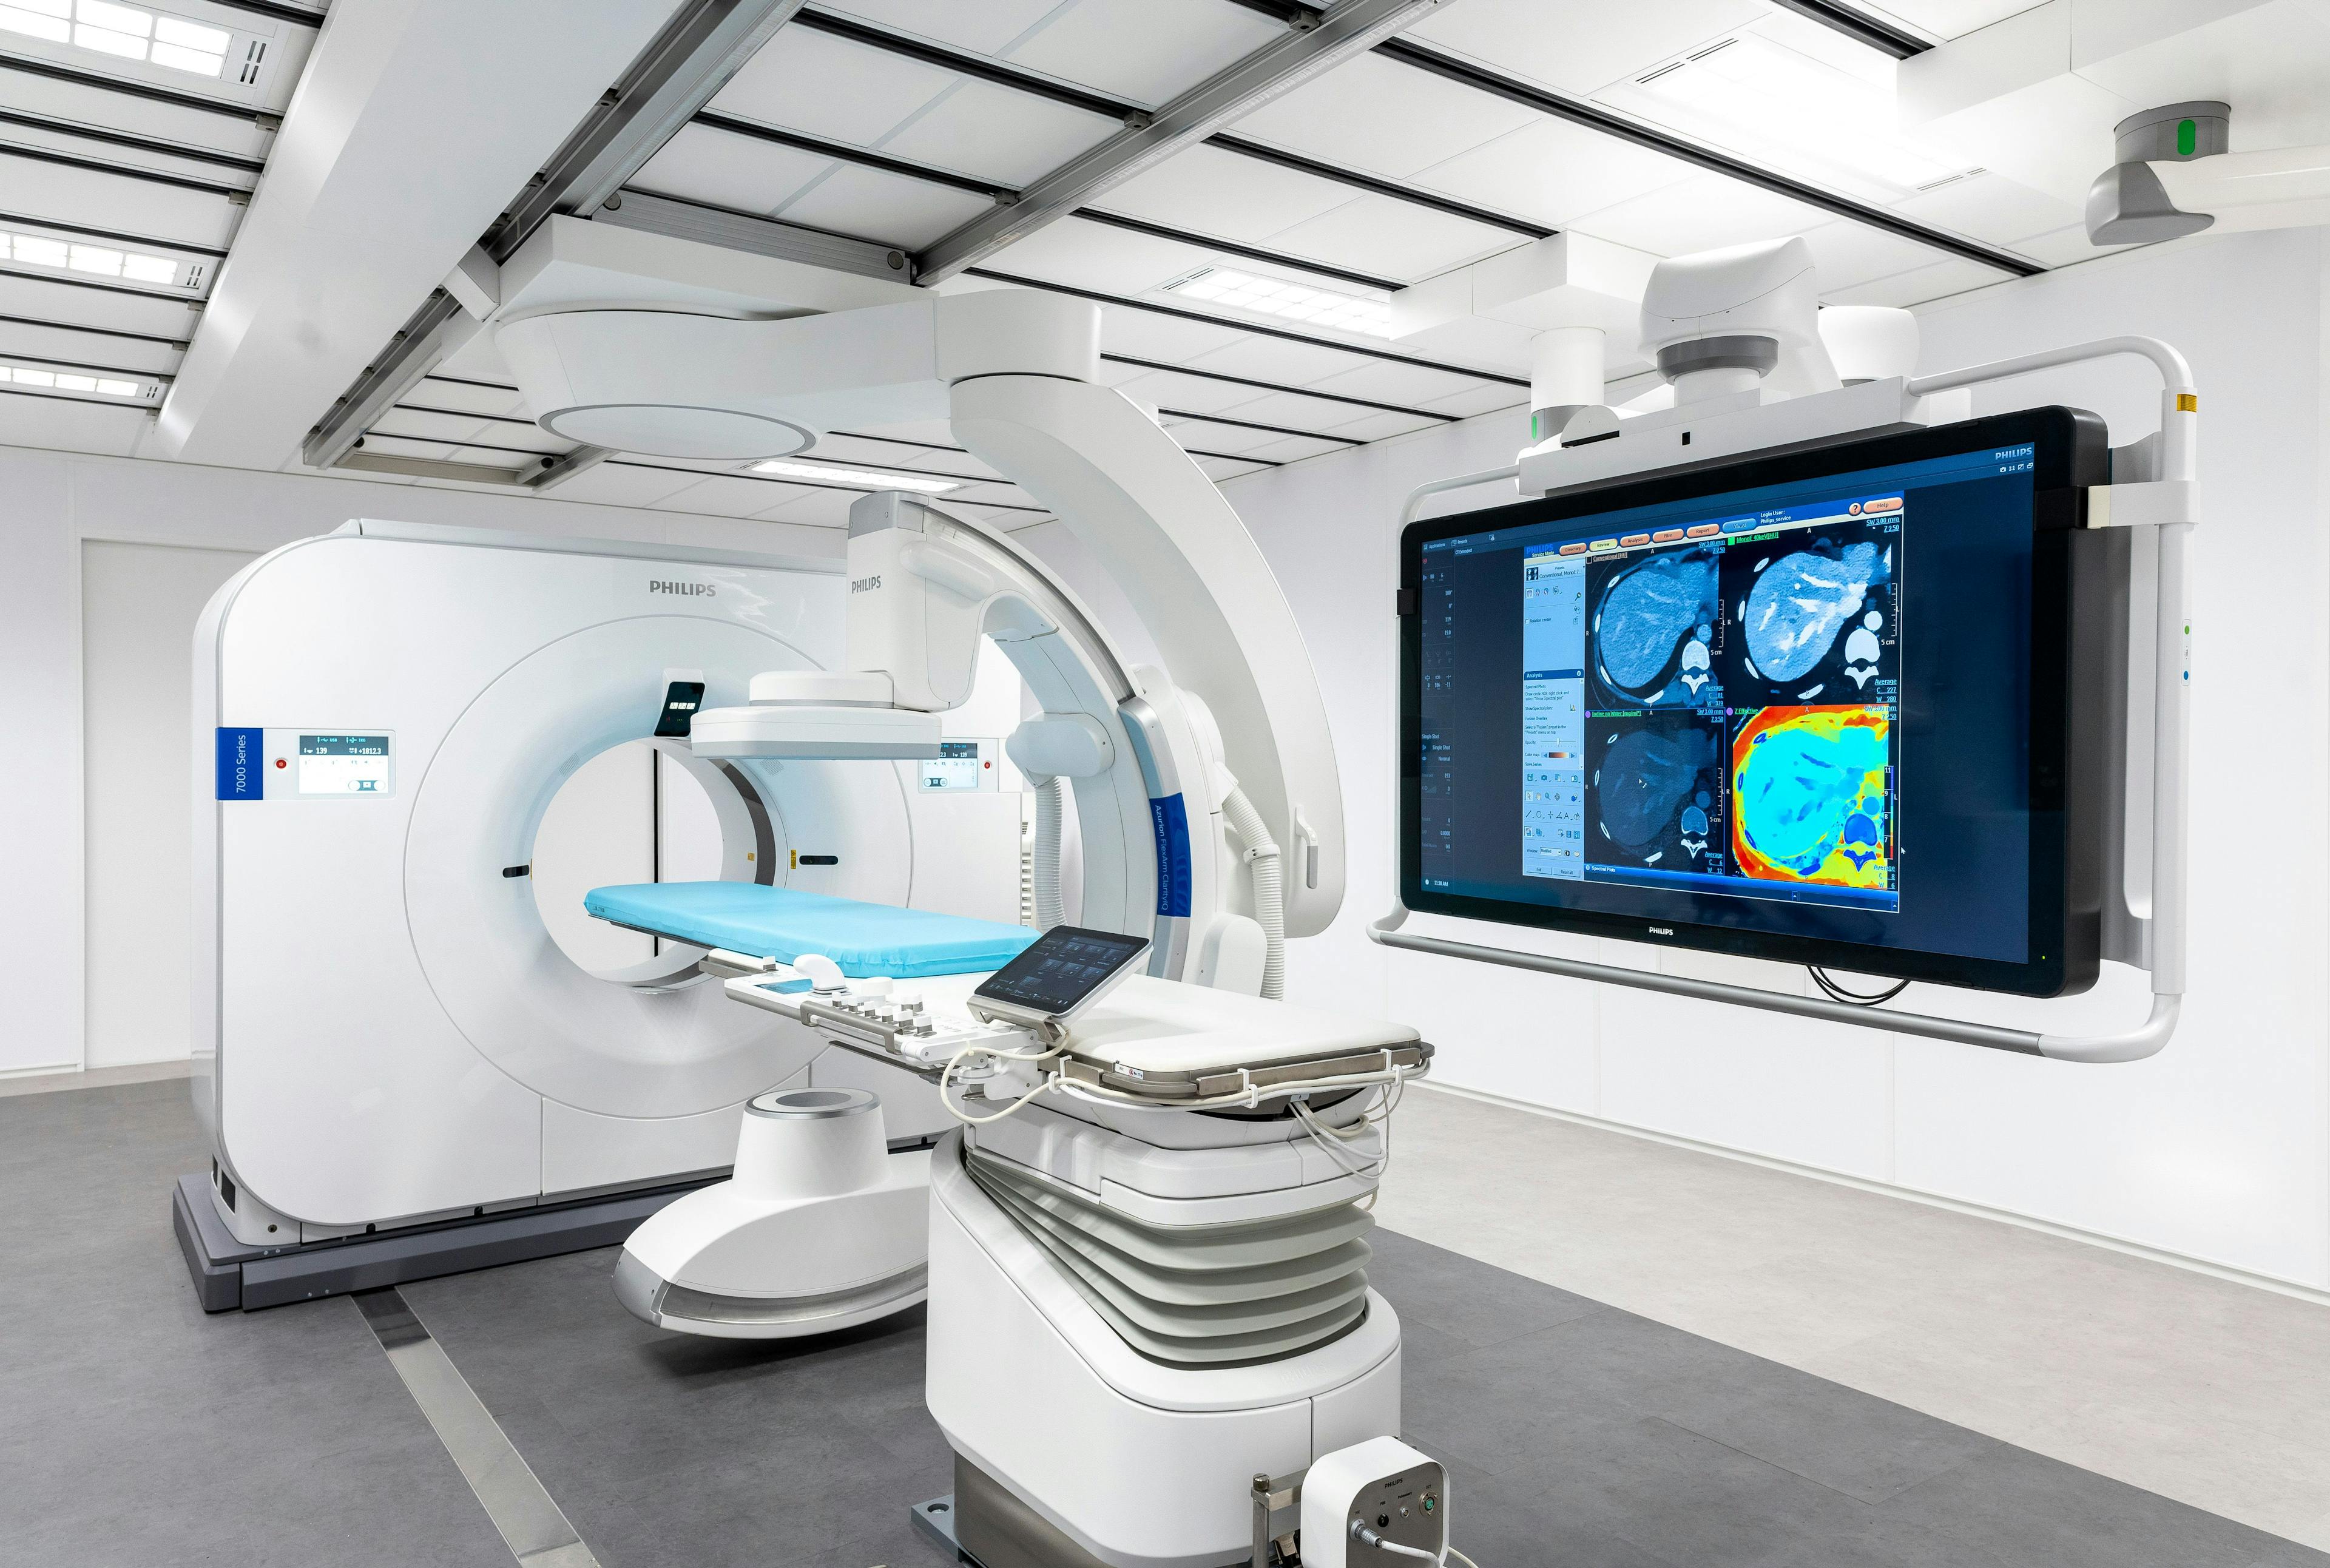 Will a New Spectral CT Imaging Suite Reinvent Interventional Radiology?